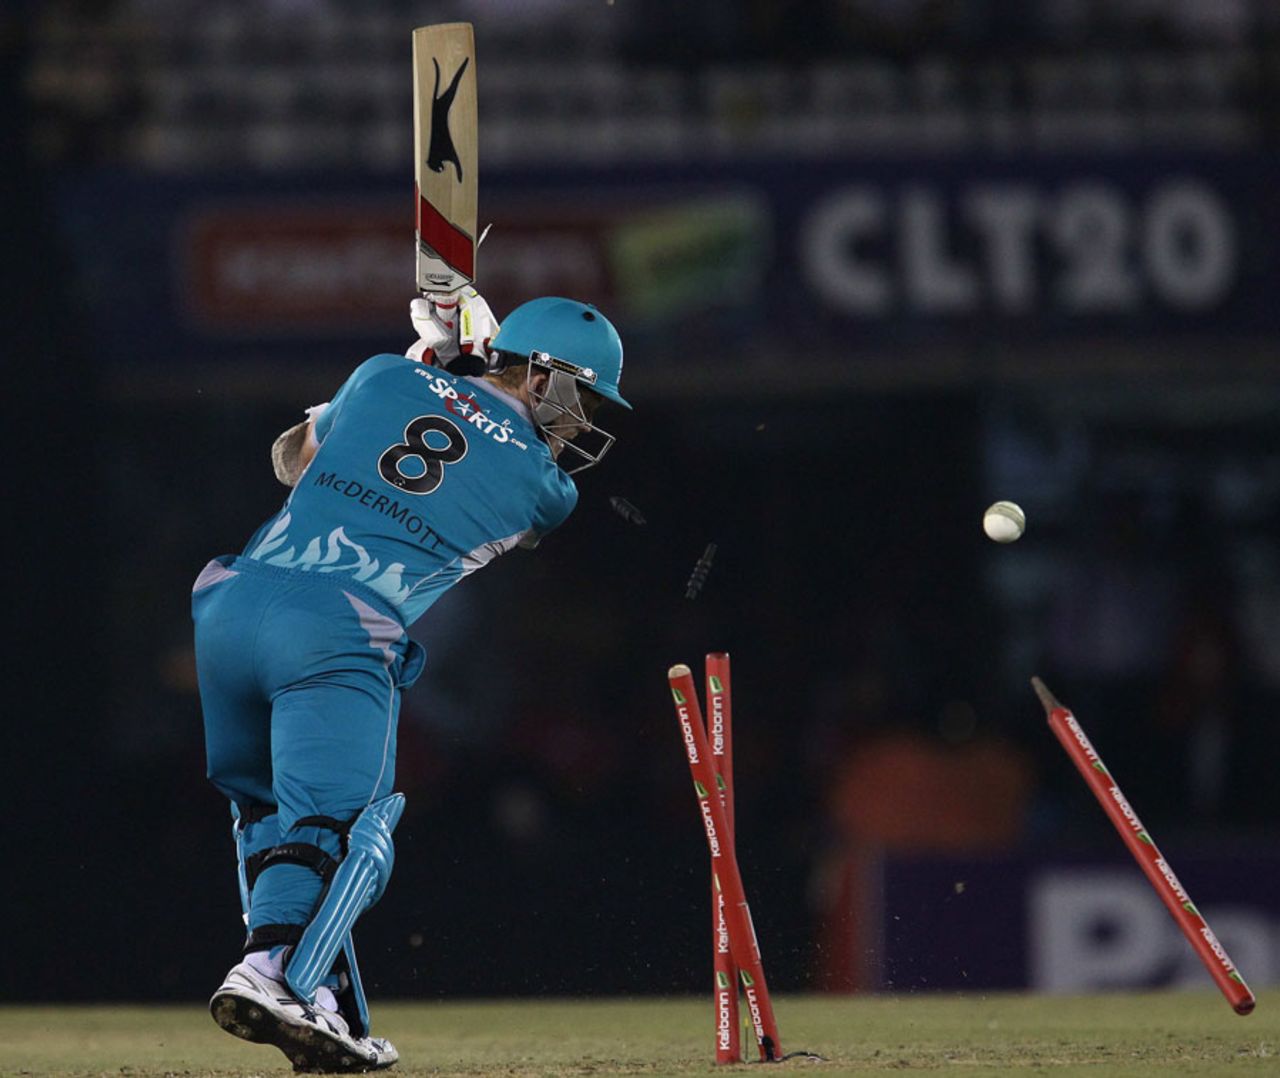 Alister McDermott looks back at his uprooted stumps, Brisbane Heat v Titans, Group B, Champions League 2013, Mohali, September 24, 2013